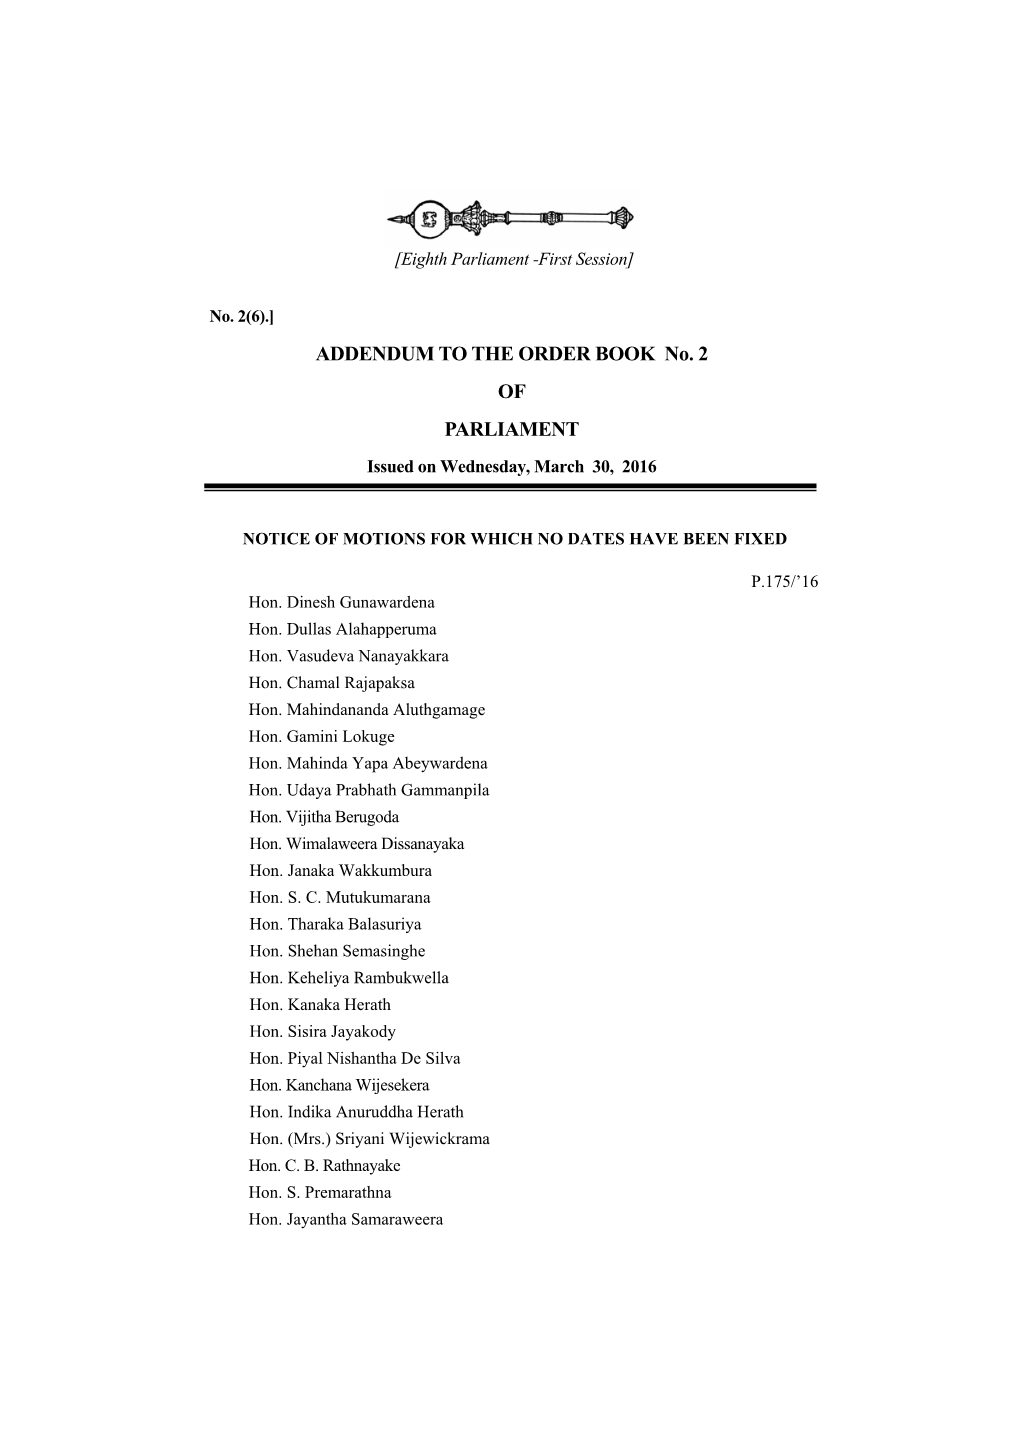 ADDENDUM to the ORDER BOOK No. 2 of PARLIAMENT Issued on Wednesday, March 30, 2016